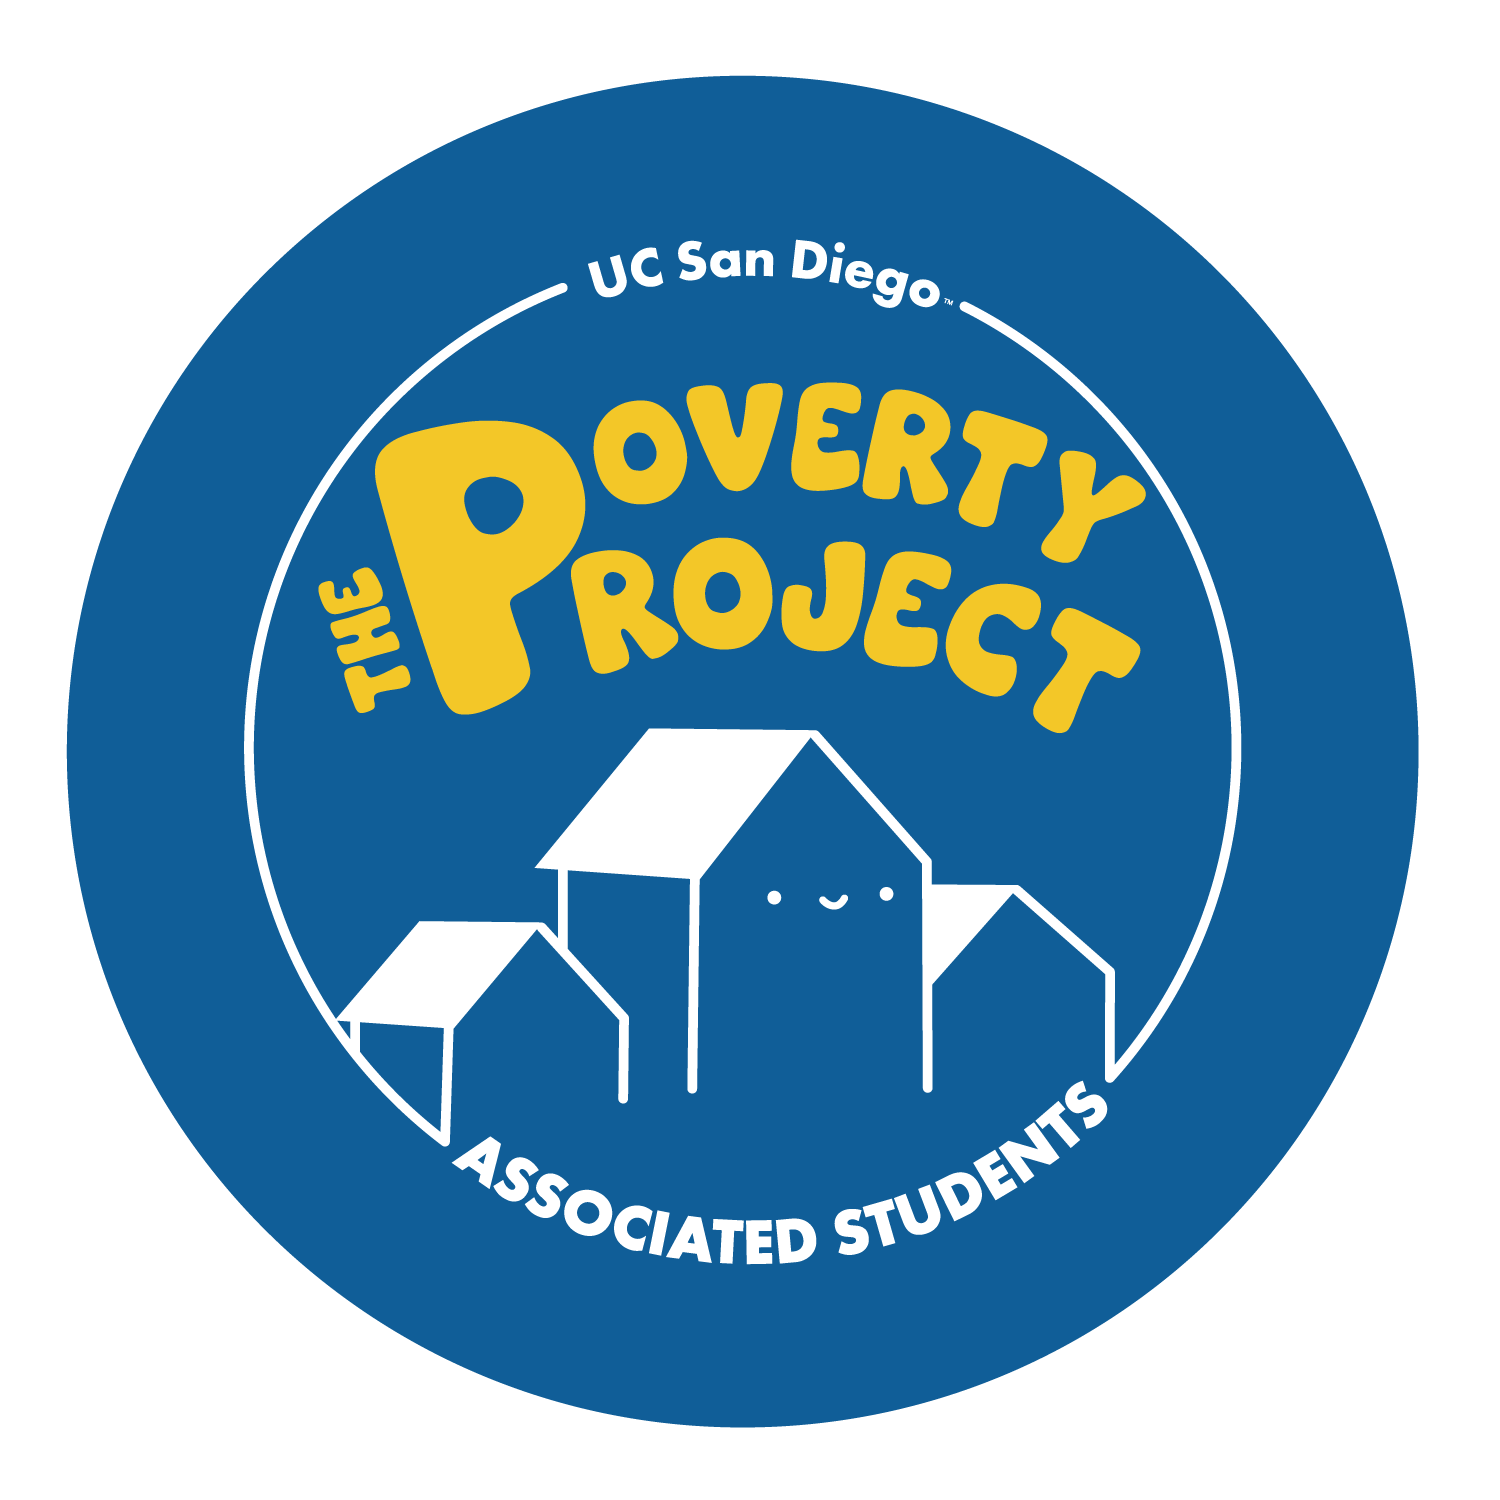 Blue, white, yellow poverty project logo.